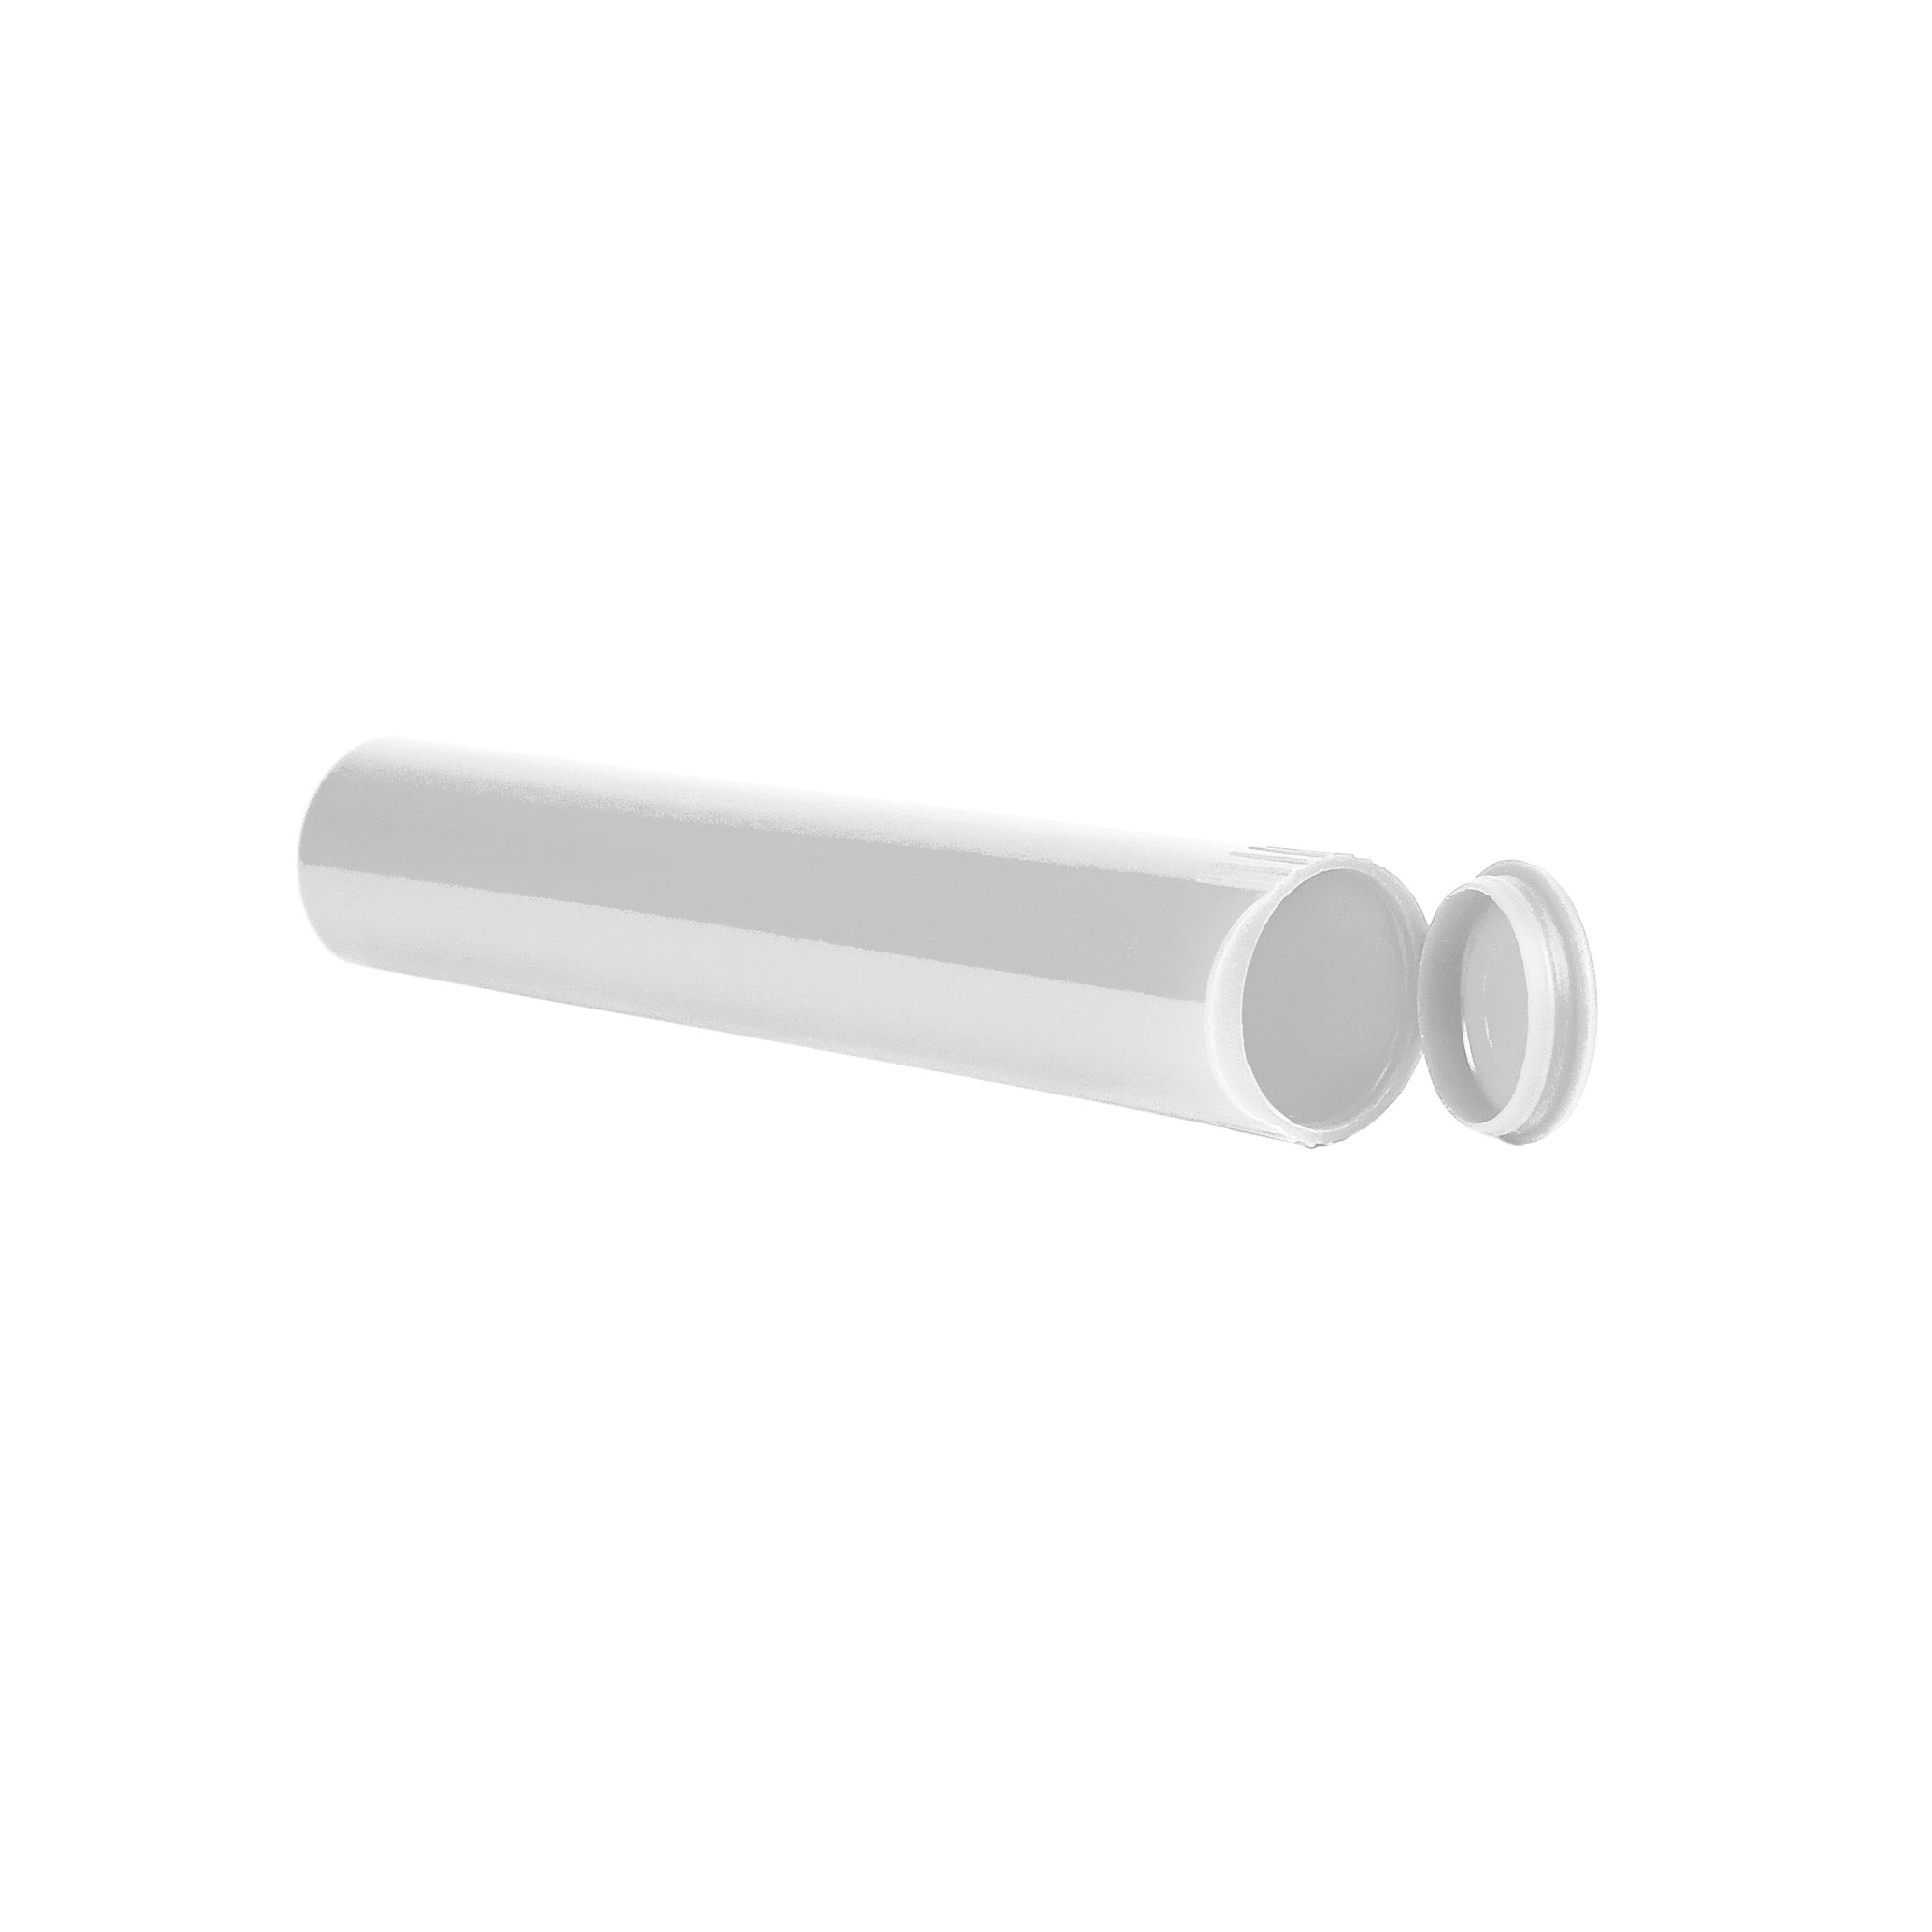 98mm Rx Squeeze Tubes Opaque White - 700 Count